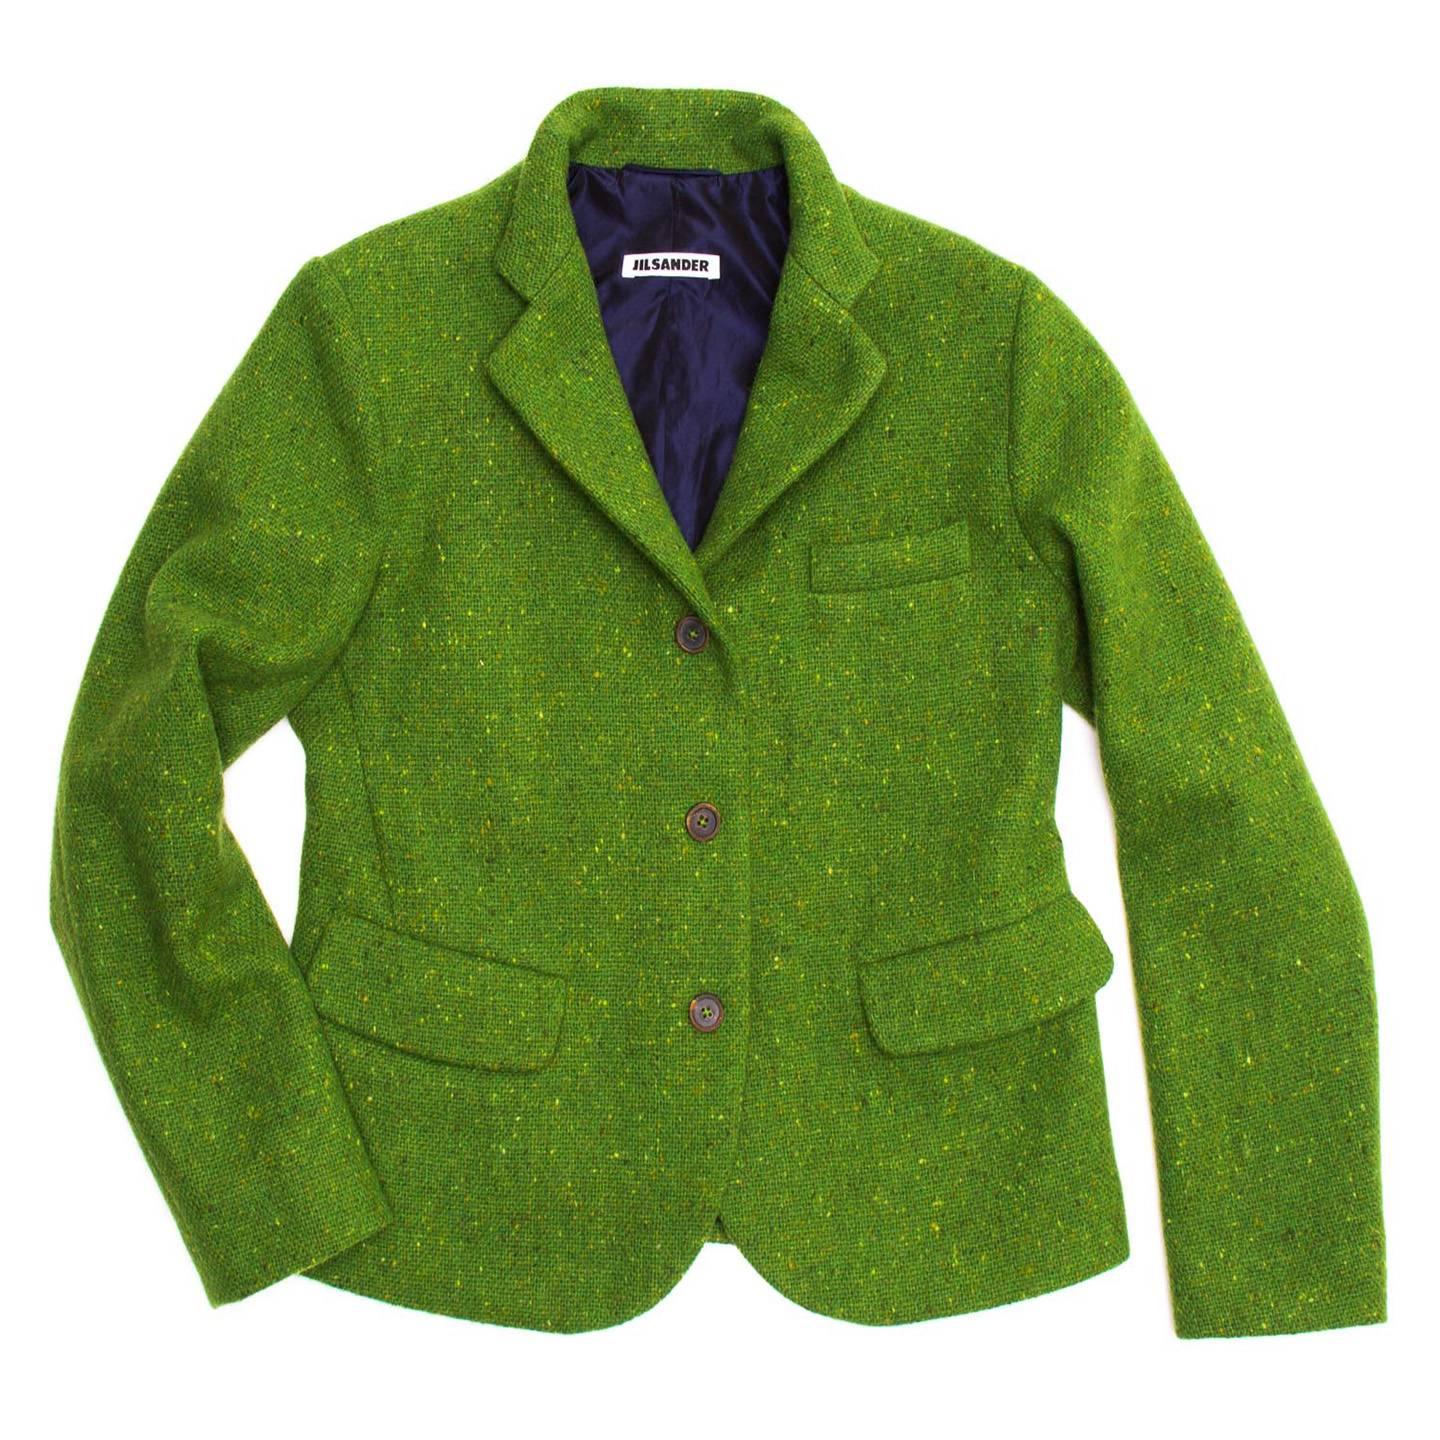 Bright green virgin wool tweed short blazer with three brown buttons closure and small lapel. The single breasted front has a round shaped hem at center front, two flap pockets sit at waist and a slit pocket at breast. Made in Germany.

Size  42